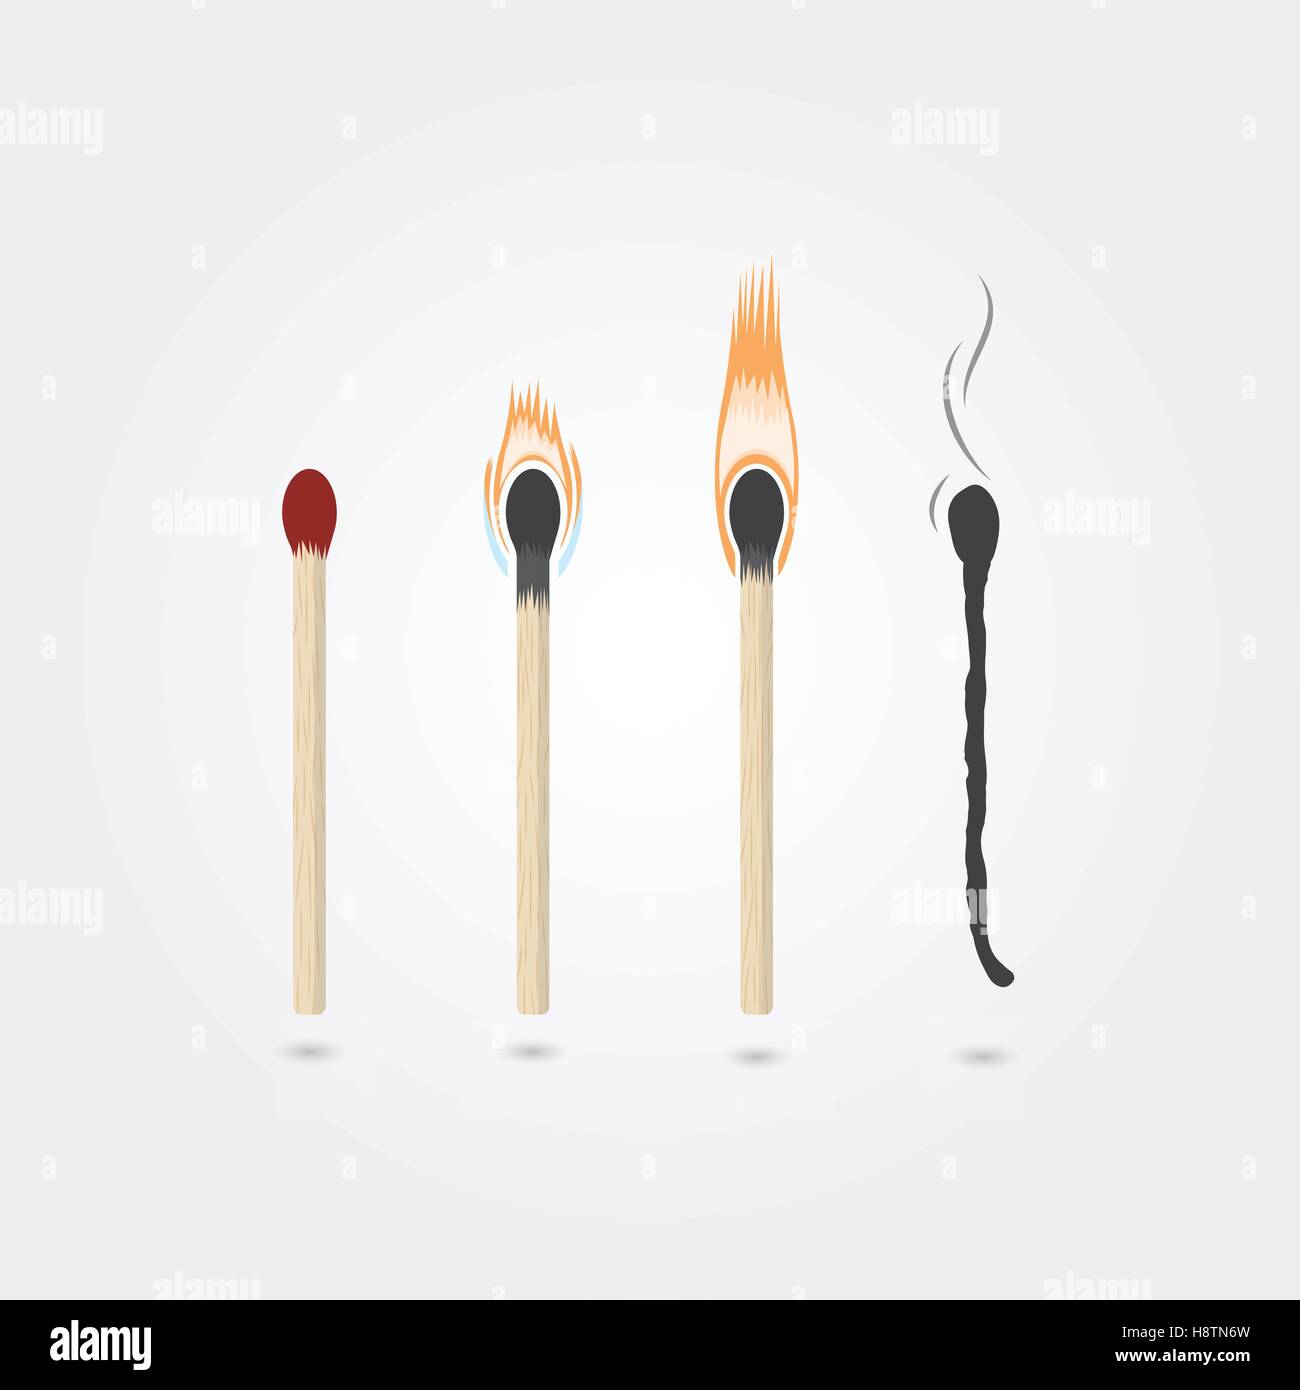 Four stages of burning matches. Realistic vector illustration. Stock Vector